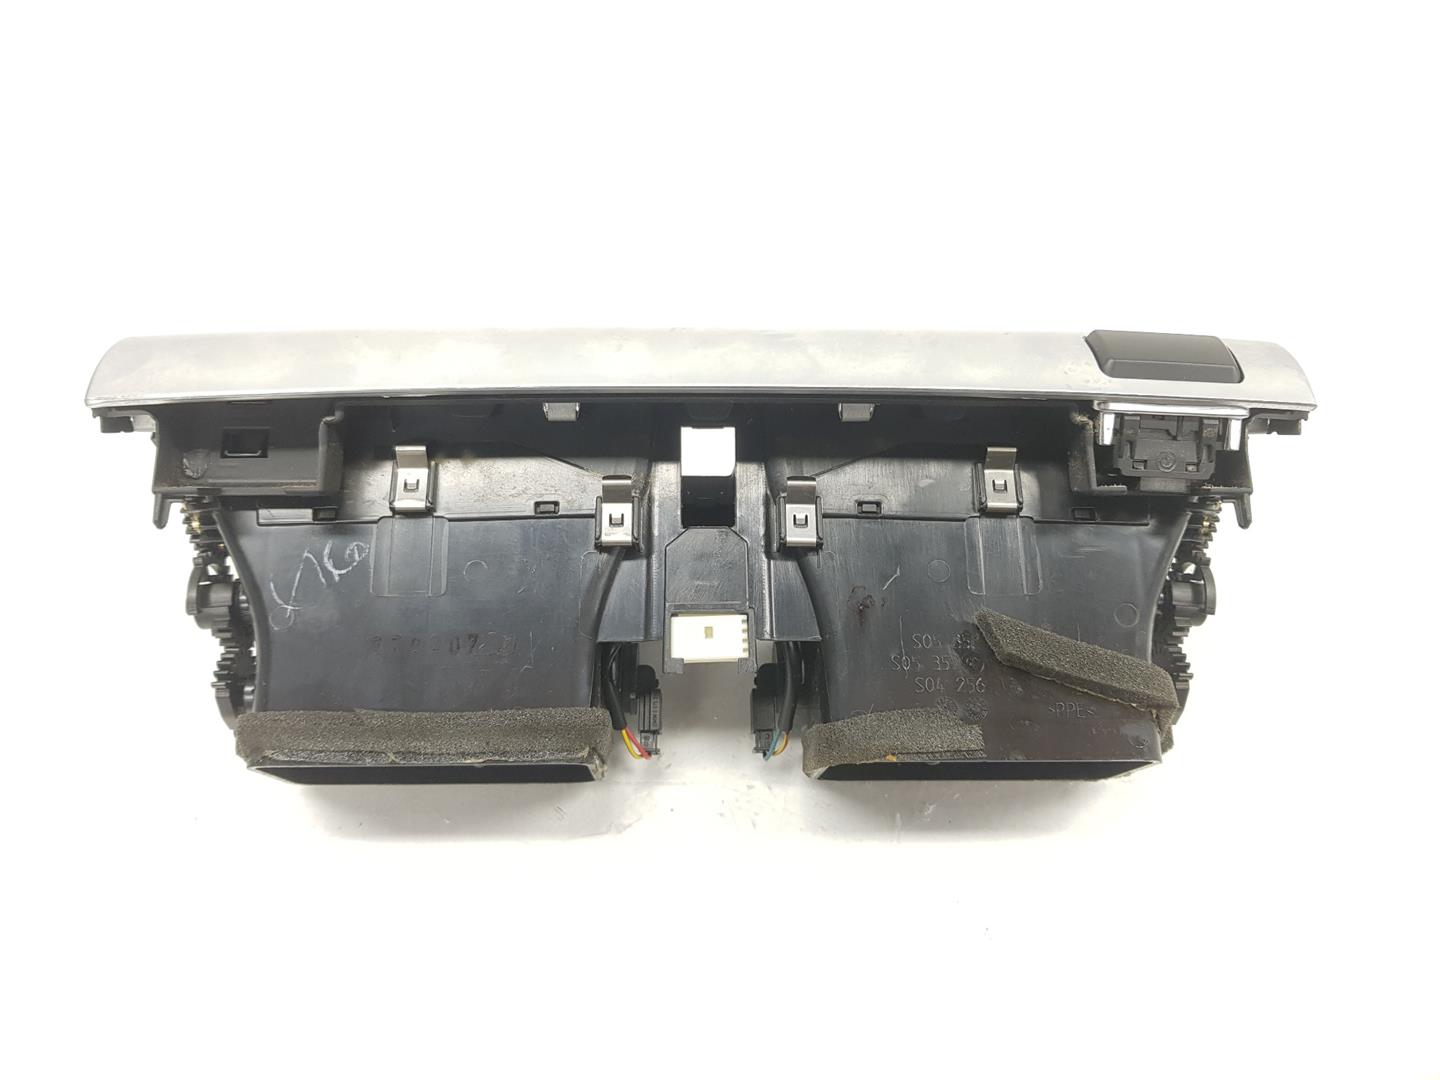 BMW X5 E70 (2006-2013) Other Interior Parts 64226958654, 6958654 23799316